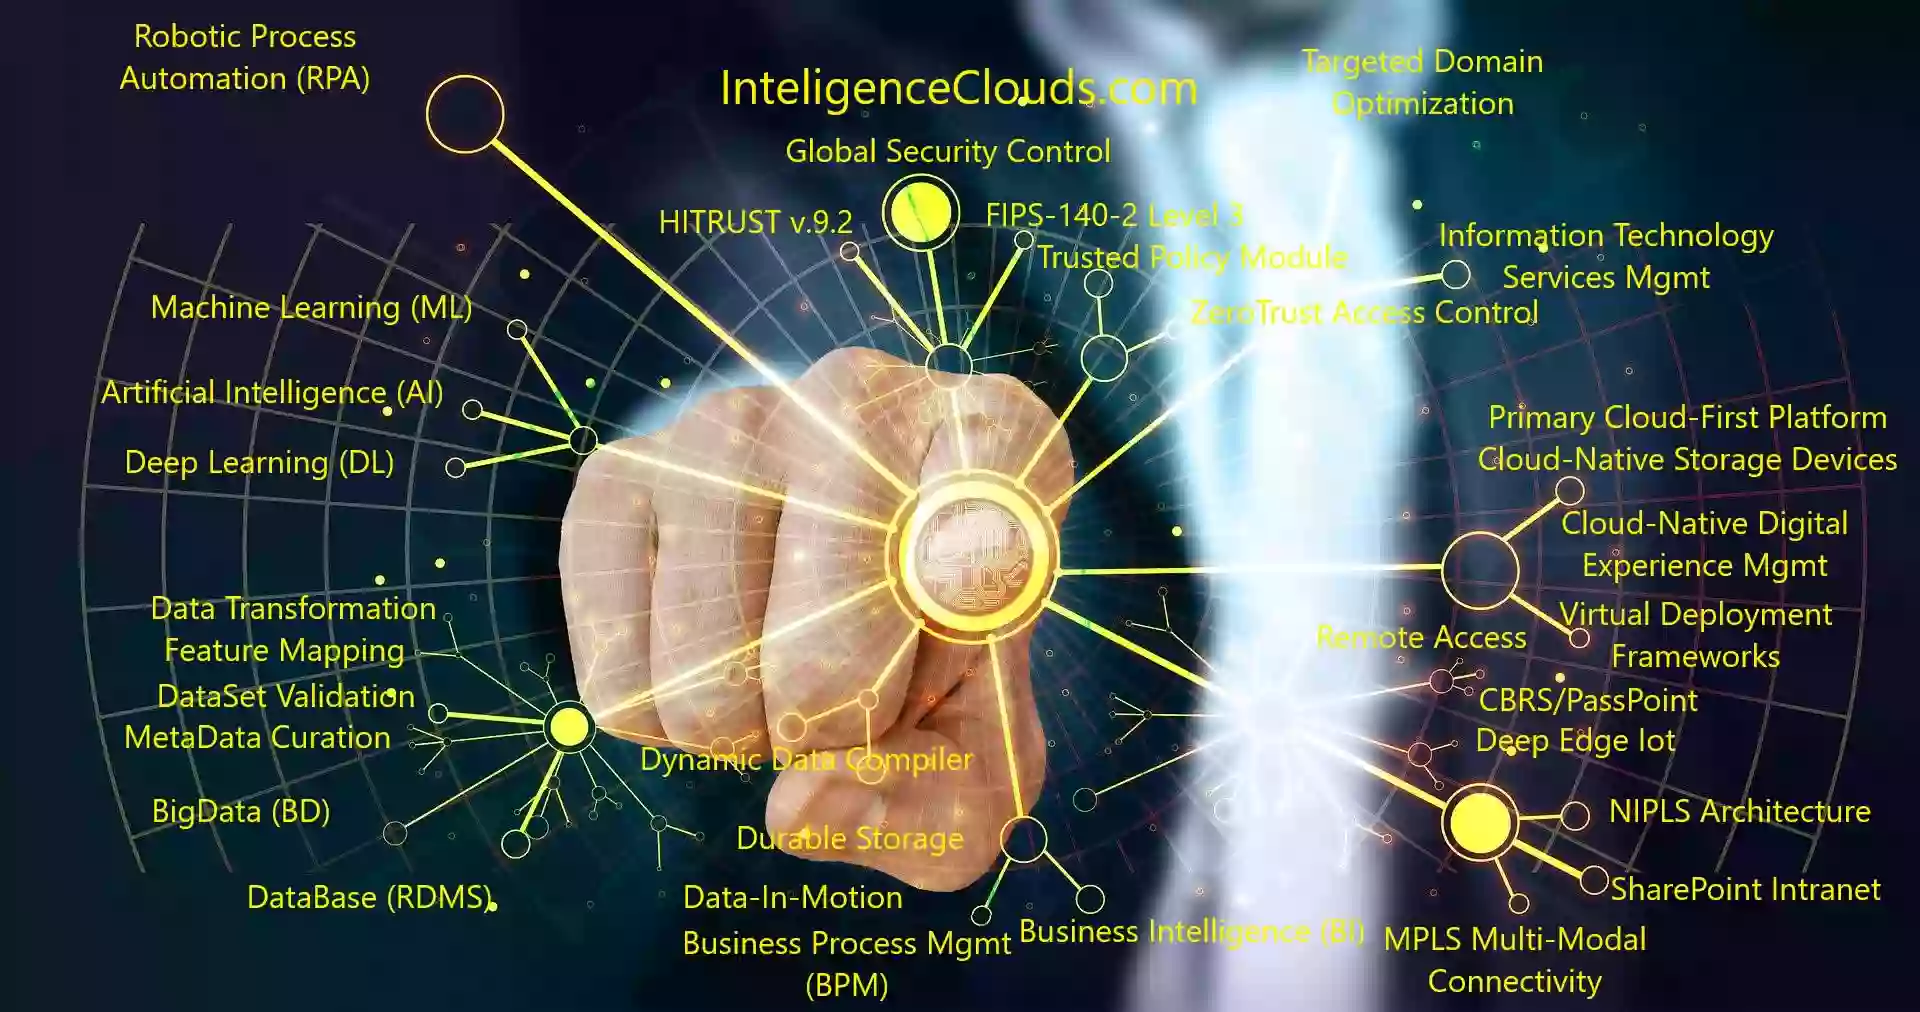 Intelligence Clouds